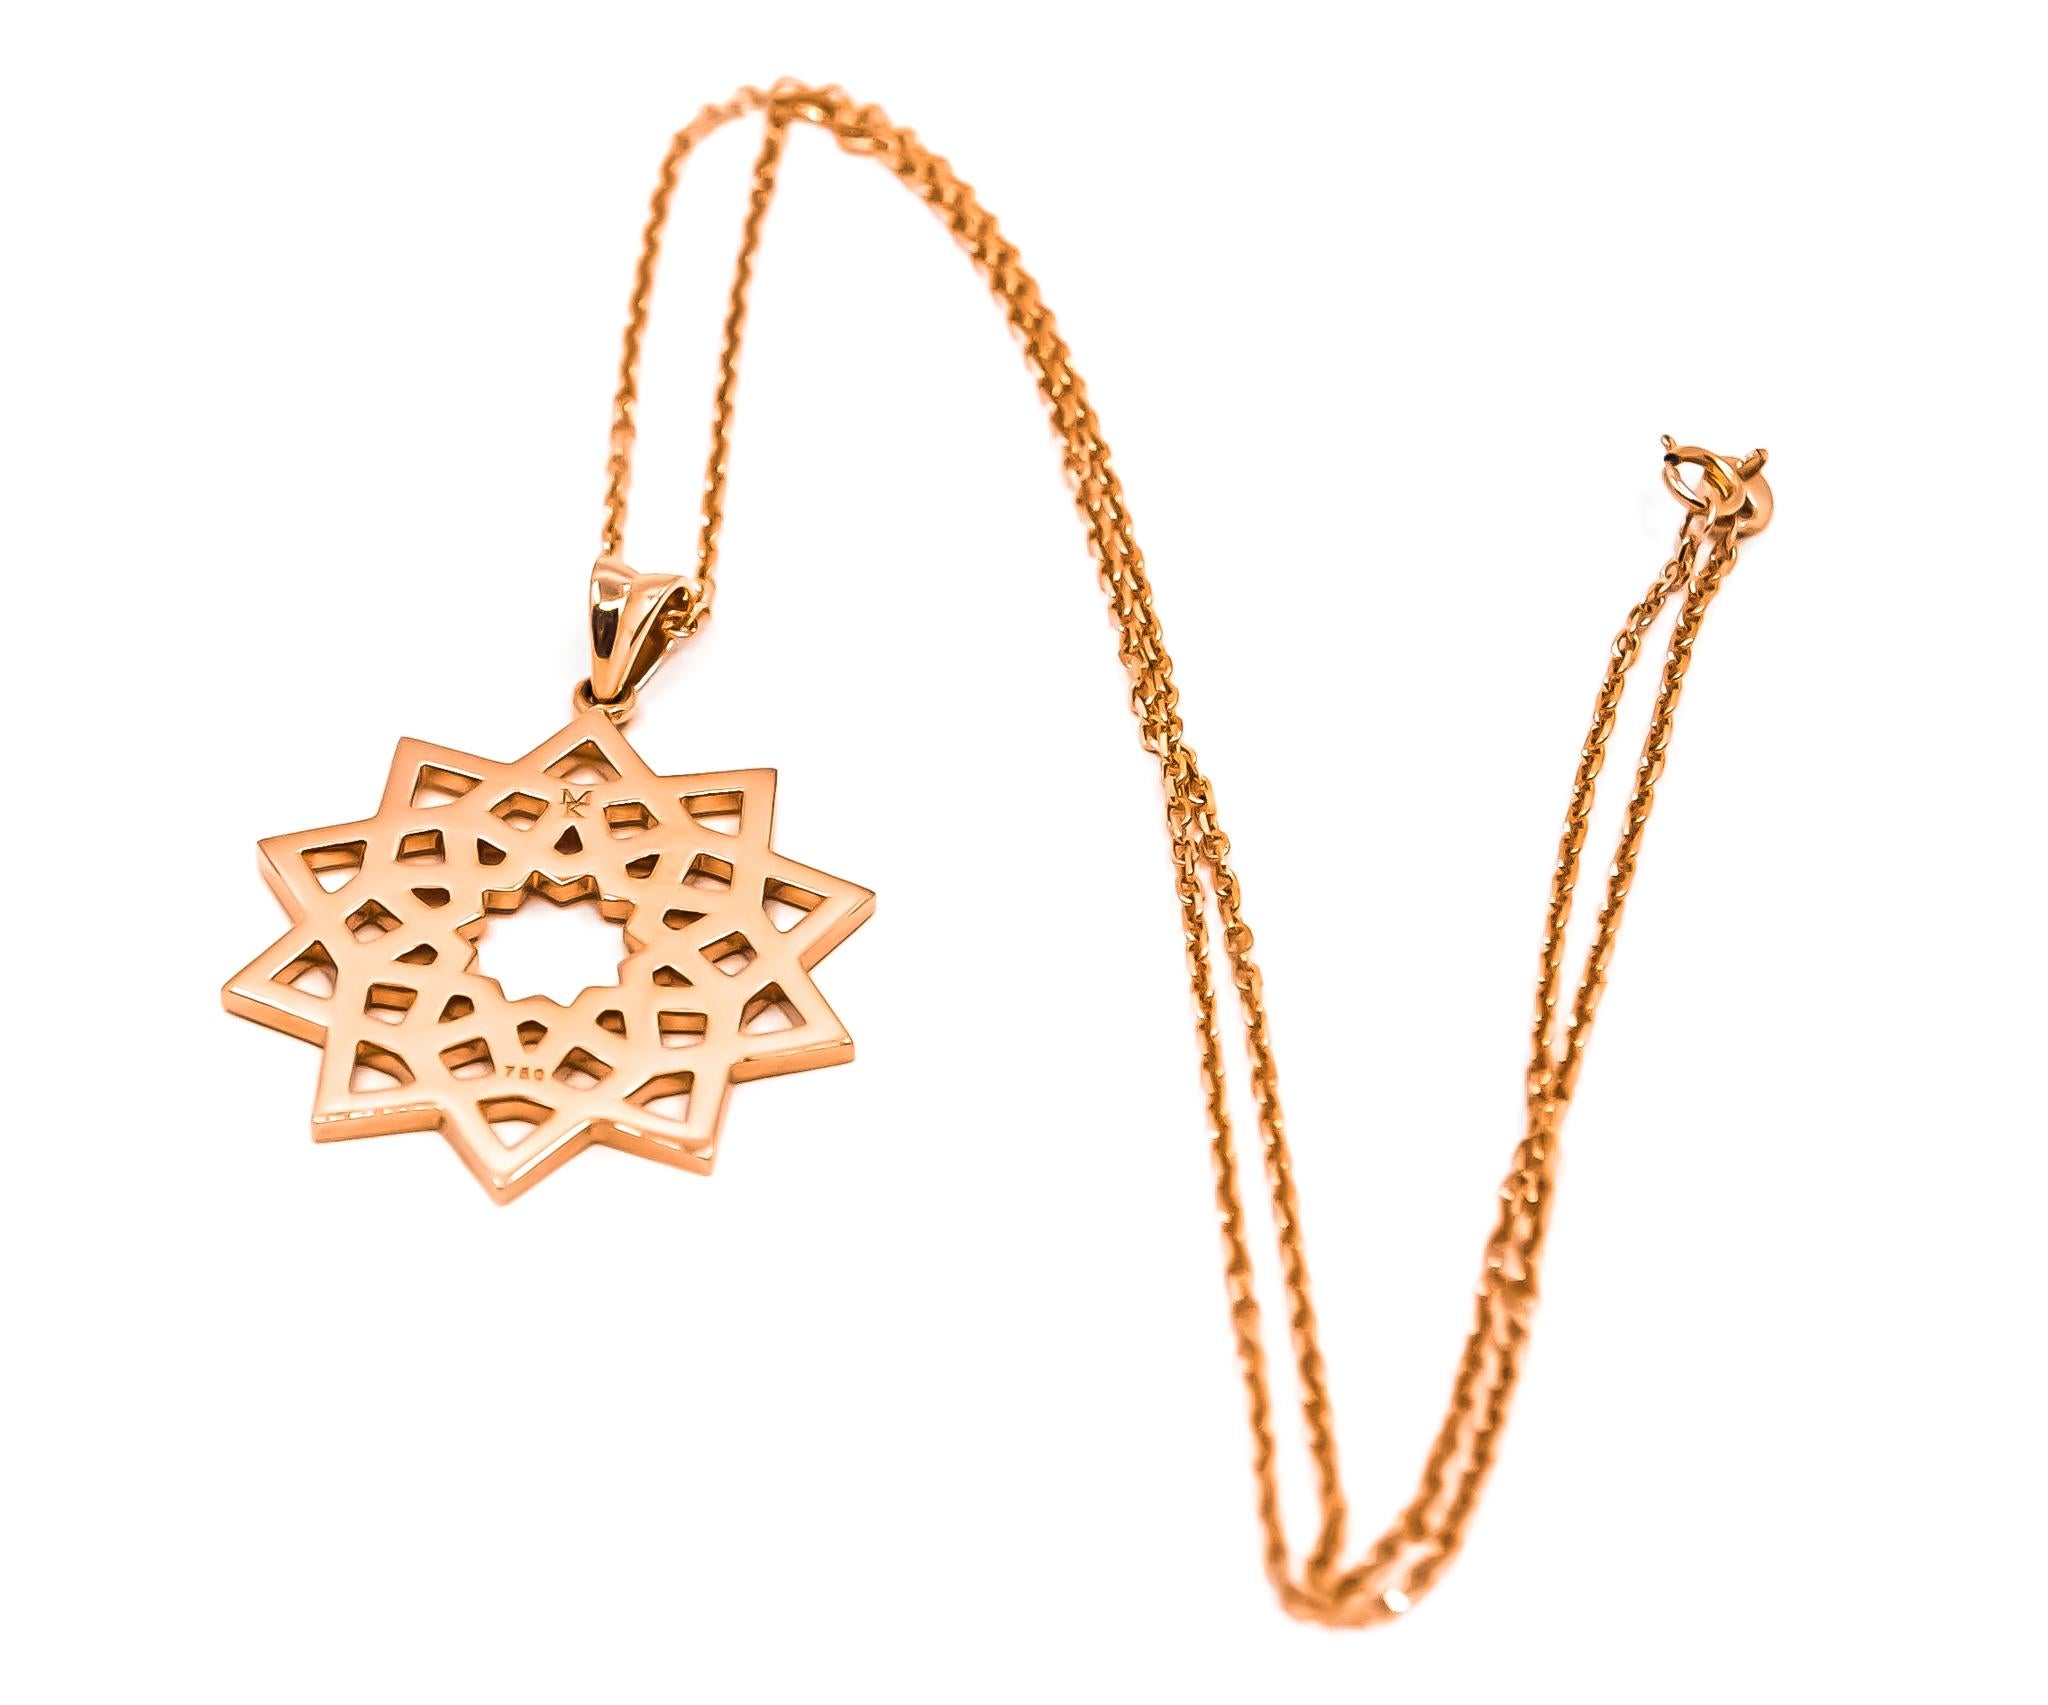 Arabesque Deco Andalusian Style Pendant Necklace in 18kt Rose Gold

The design of the pendant is inspired by the Andalusian Style and motifs found in Al Hambra Palace in Granada in Spain.